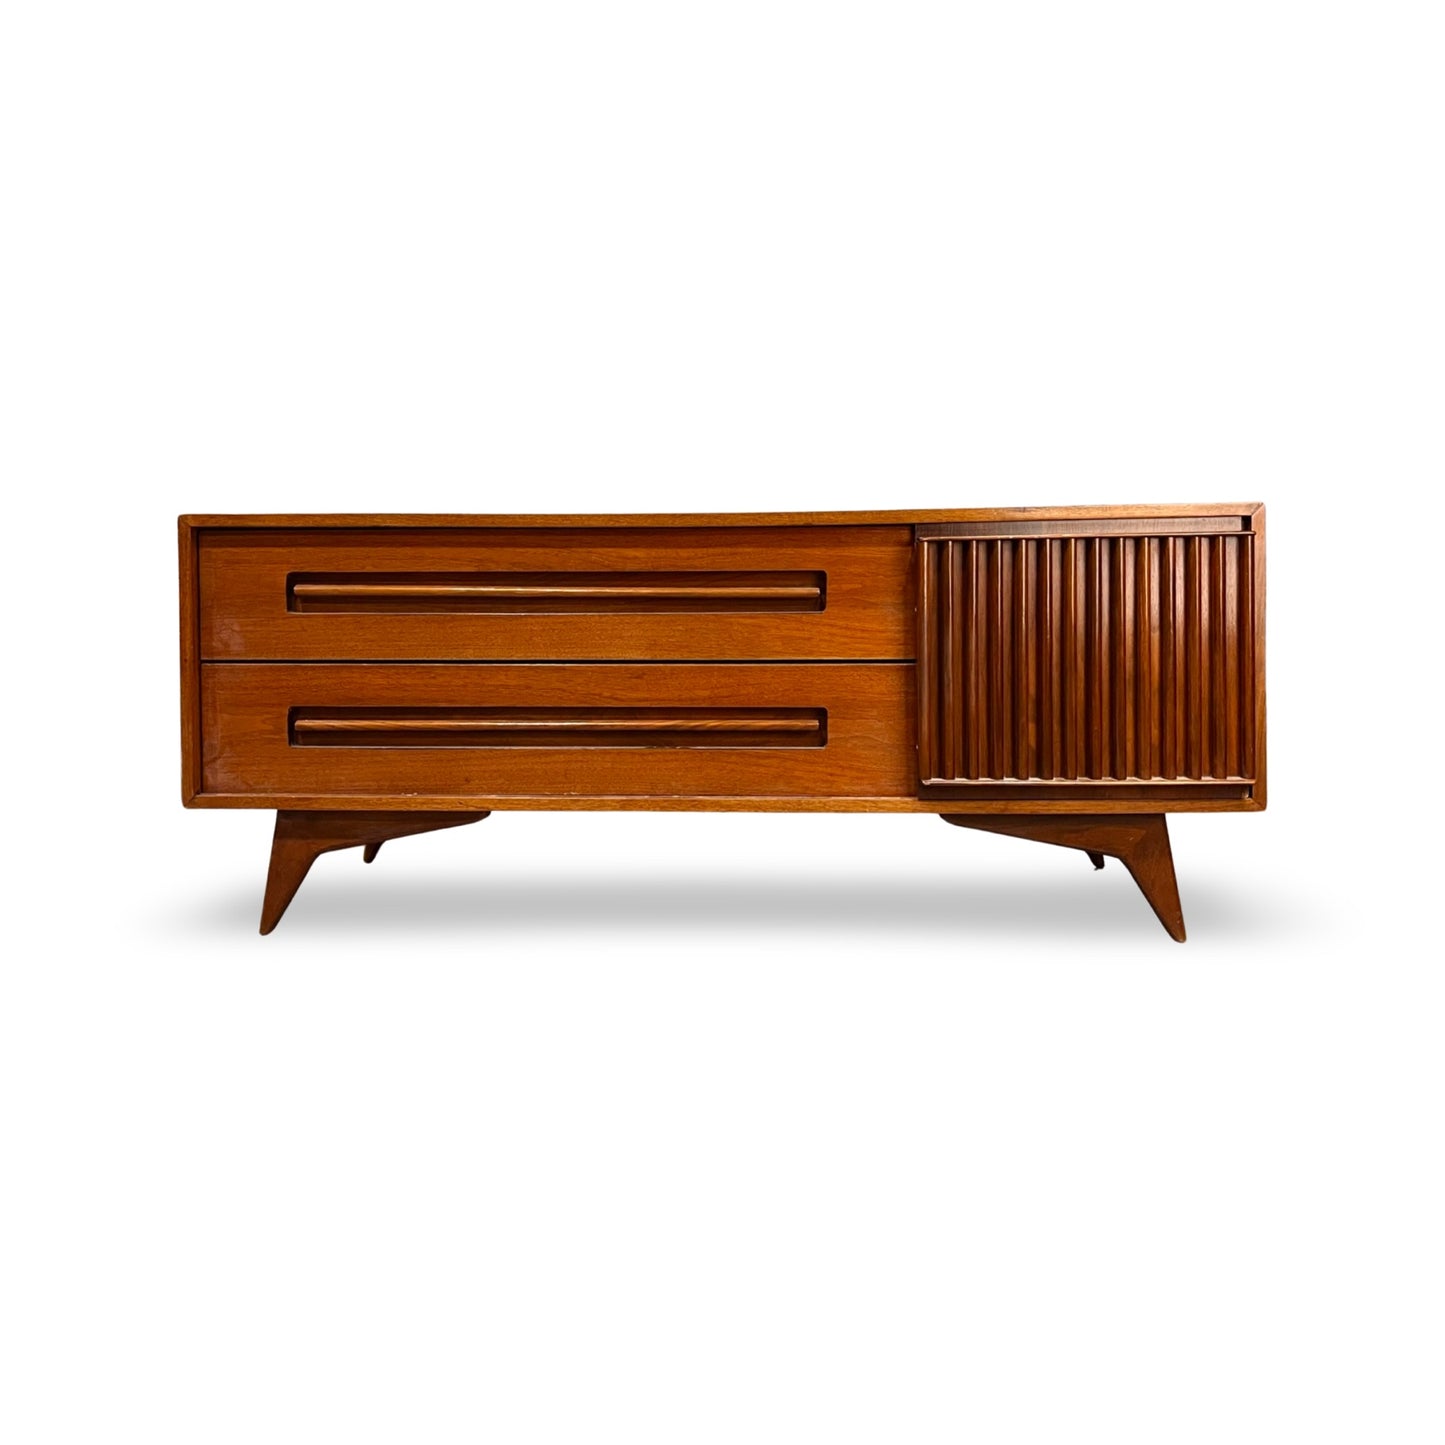 Young Manufacturing Vintage Mid Century Modern Low Profile Credenza Dresser c. 1960s